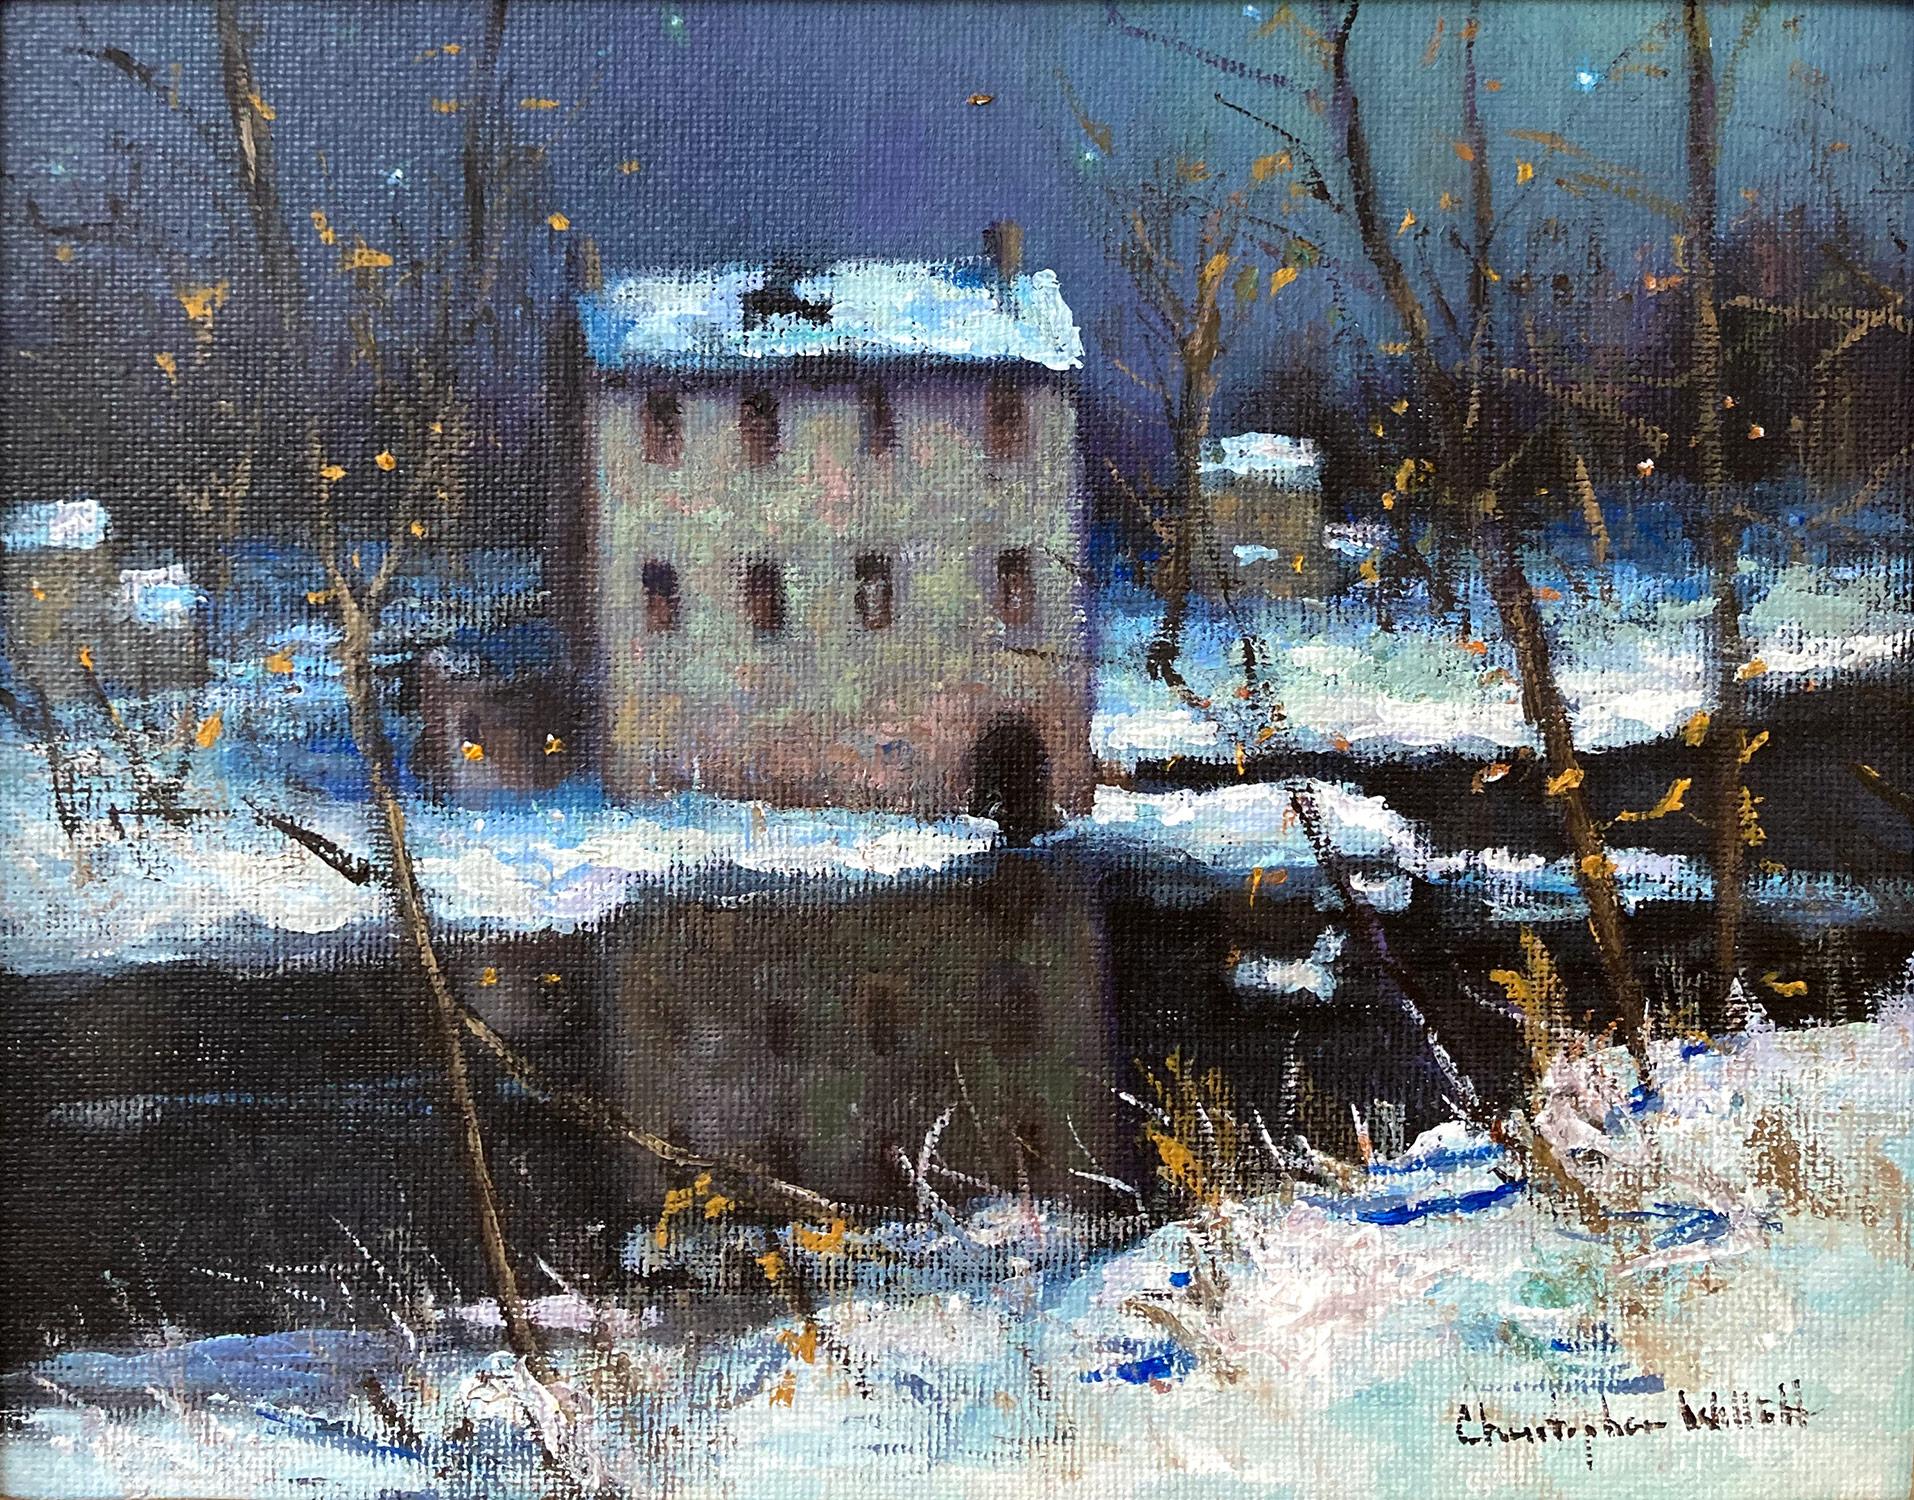 Impressionist winter pastoral scene of a quaint snow covered home by the Mill Along Neshaminy Creek in Bucks County, PA. Willett has portrayed this charming scene in a most intimate, yet energetic way, and has packed much feeling into this miniature